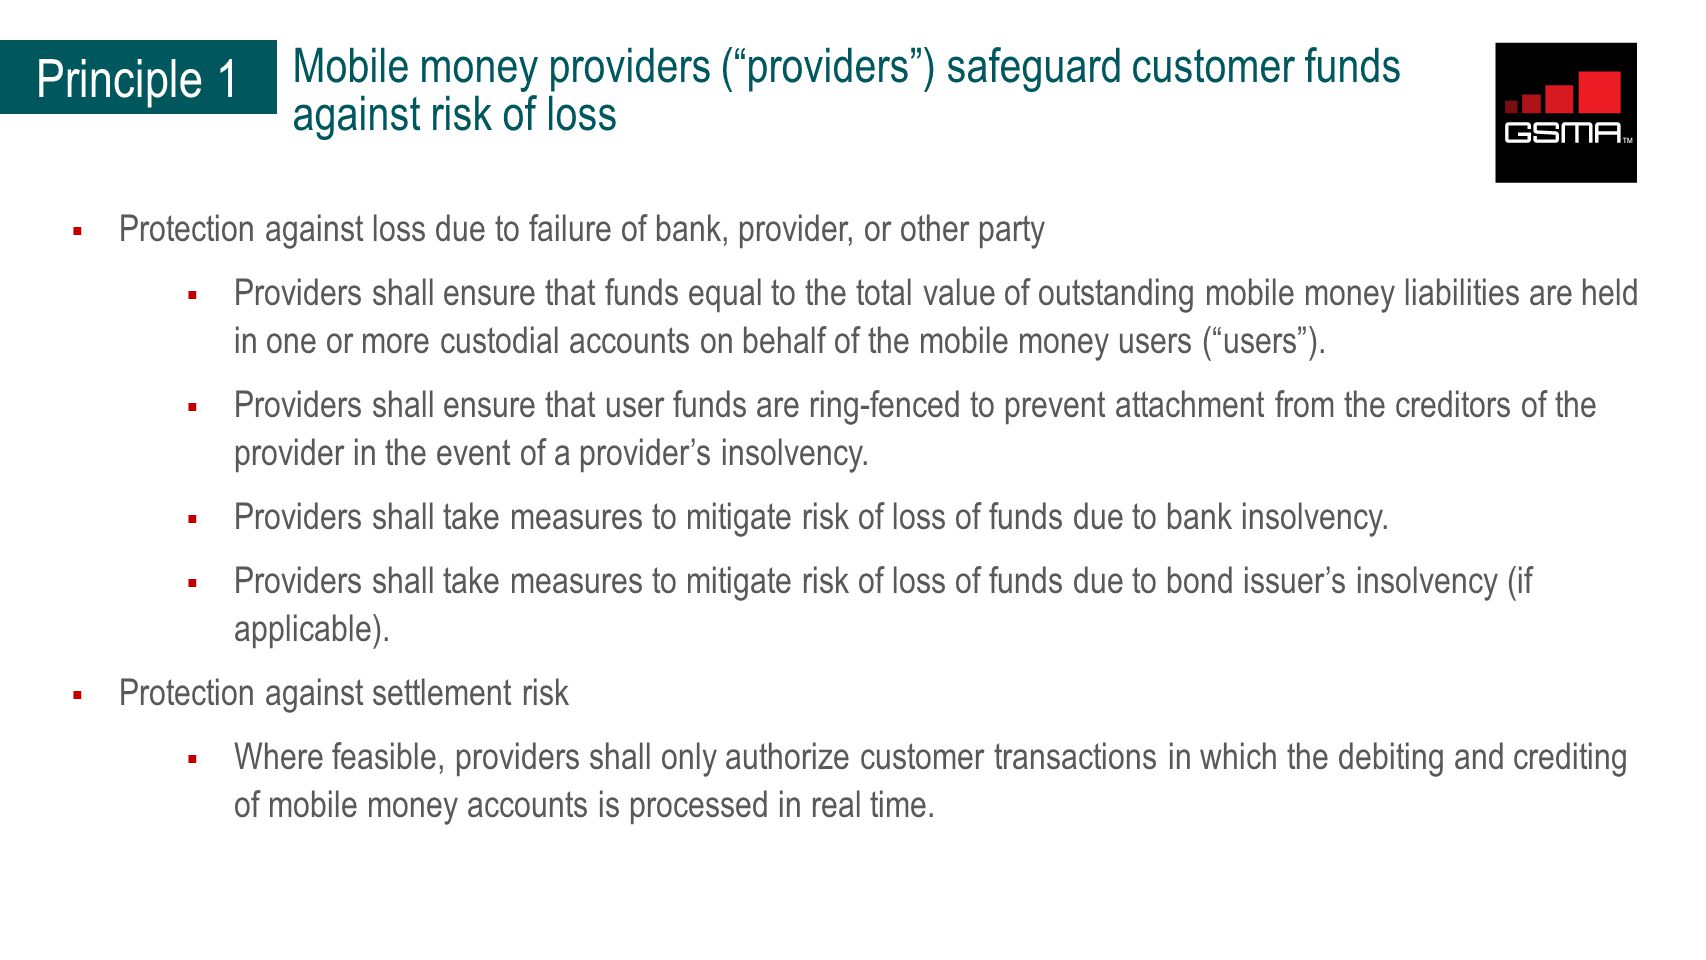  Protection against loss due to failure of bank, provider, or other party  Providers shall ensure that funds equal to the total value of outstanding mobile money liabilities are held in one or more custodial accounts on behalf of the mobile money users ( users ).